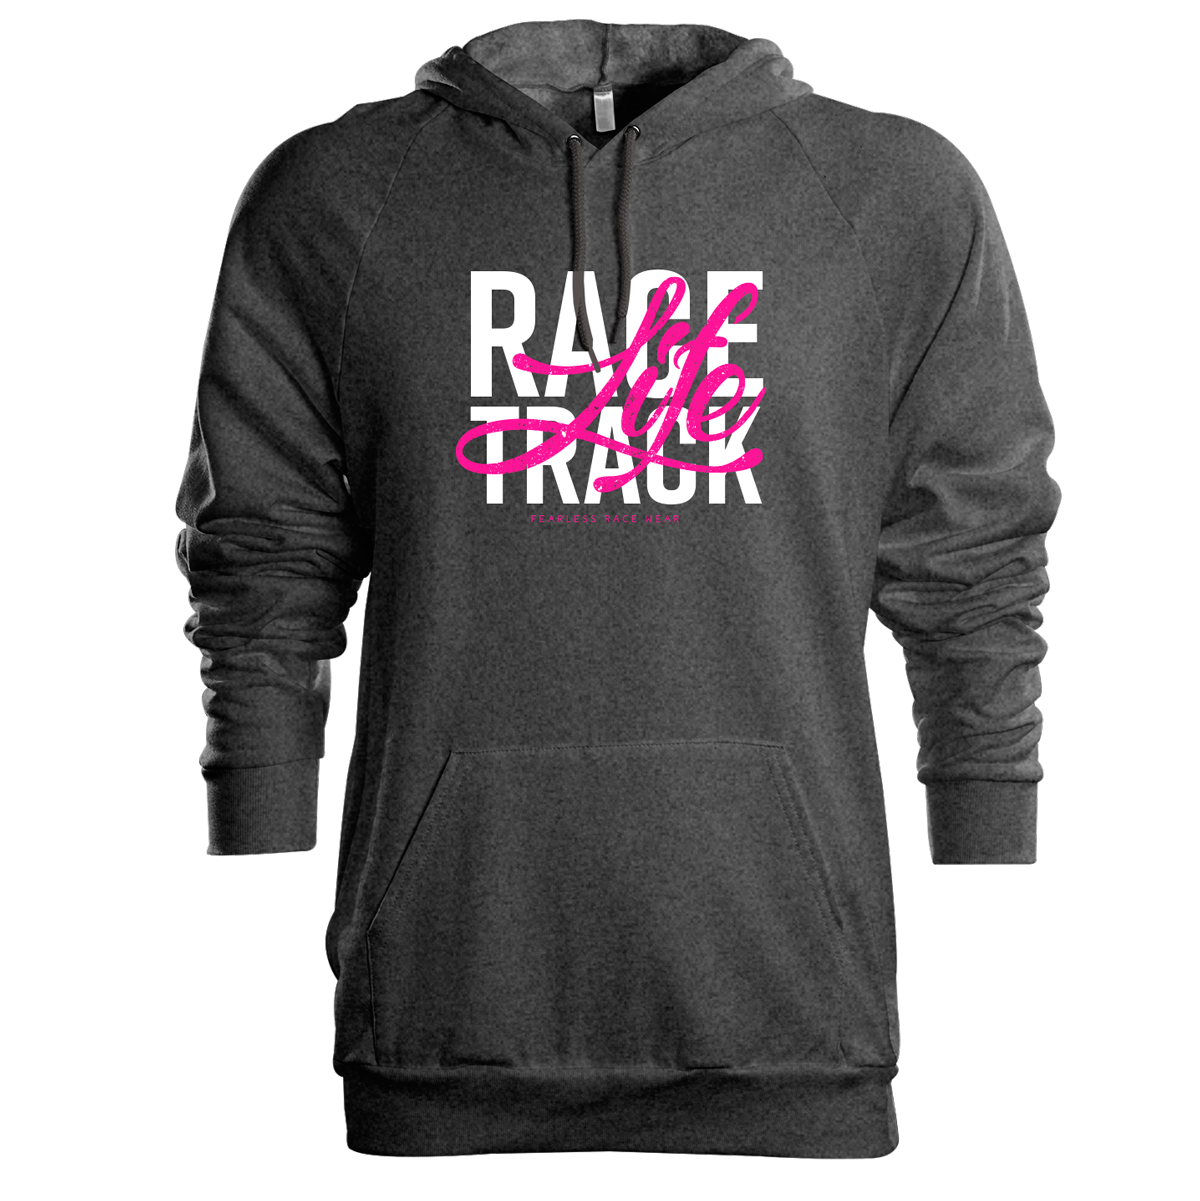 | T-Shirts Hoodies or Print + Life Wear Race Fuchsia Fearless Racetrack Red |